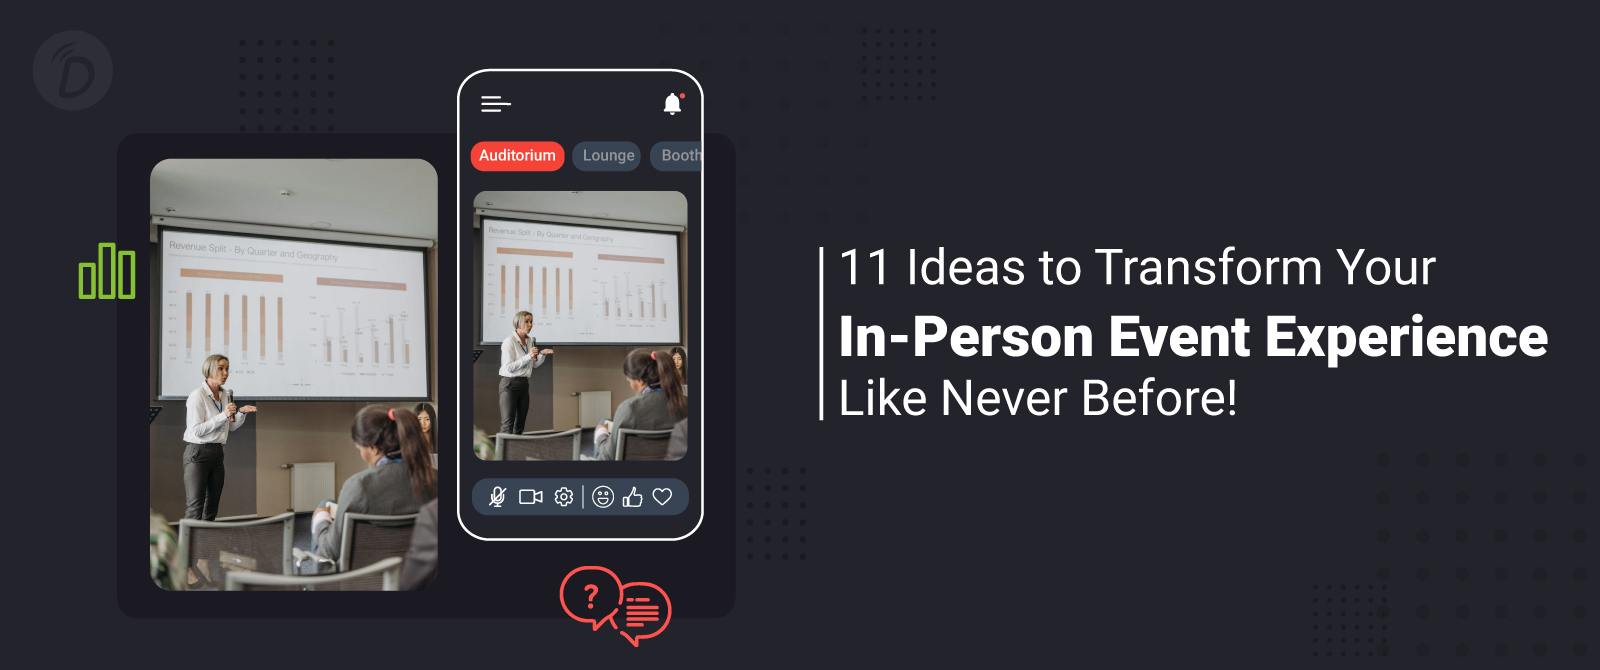 11 Ideas to Transform Your In-Person Event Experience Like Never Before!